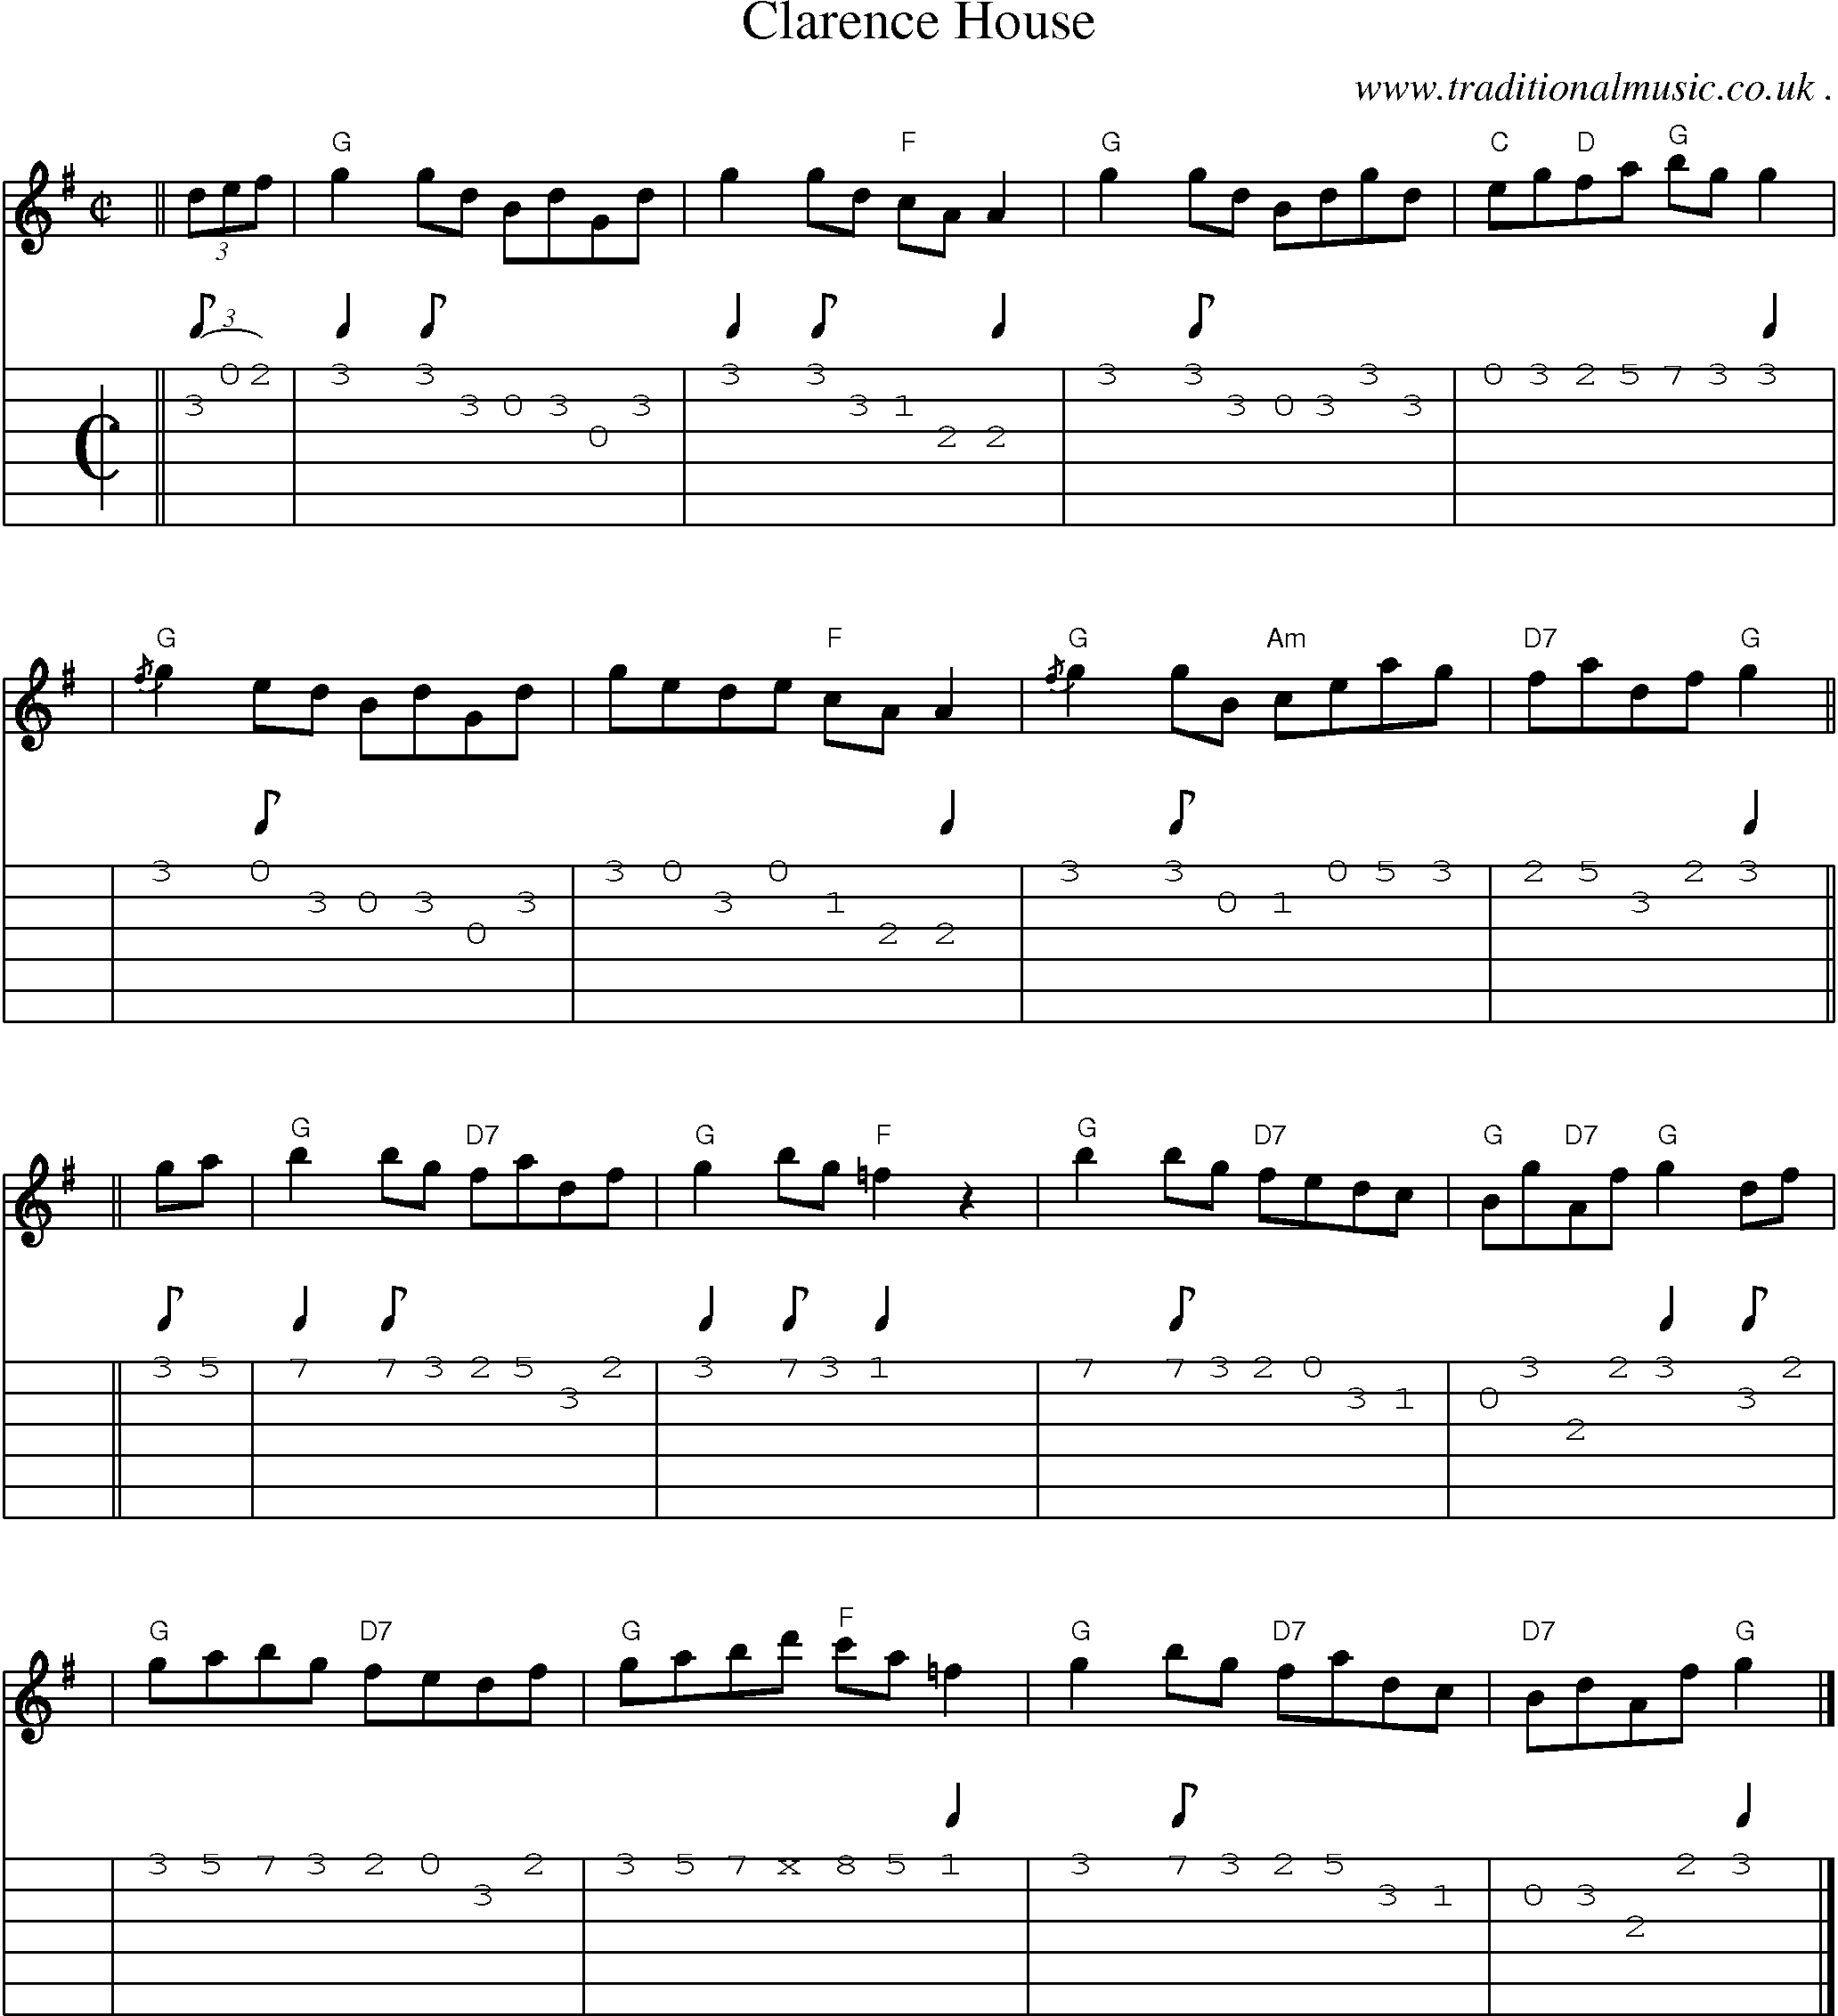 Sheet-music  score, Chords and Guitar Tabs for Clarence House